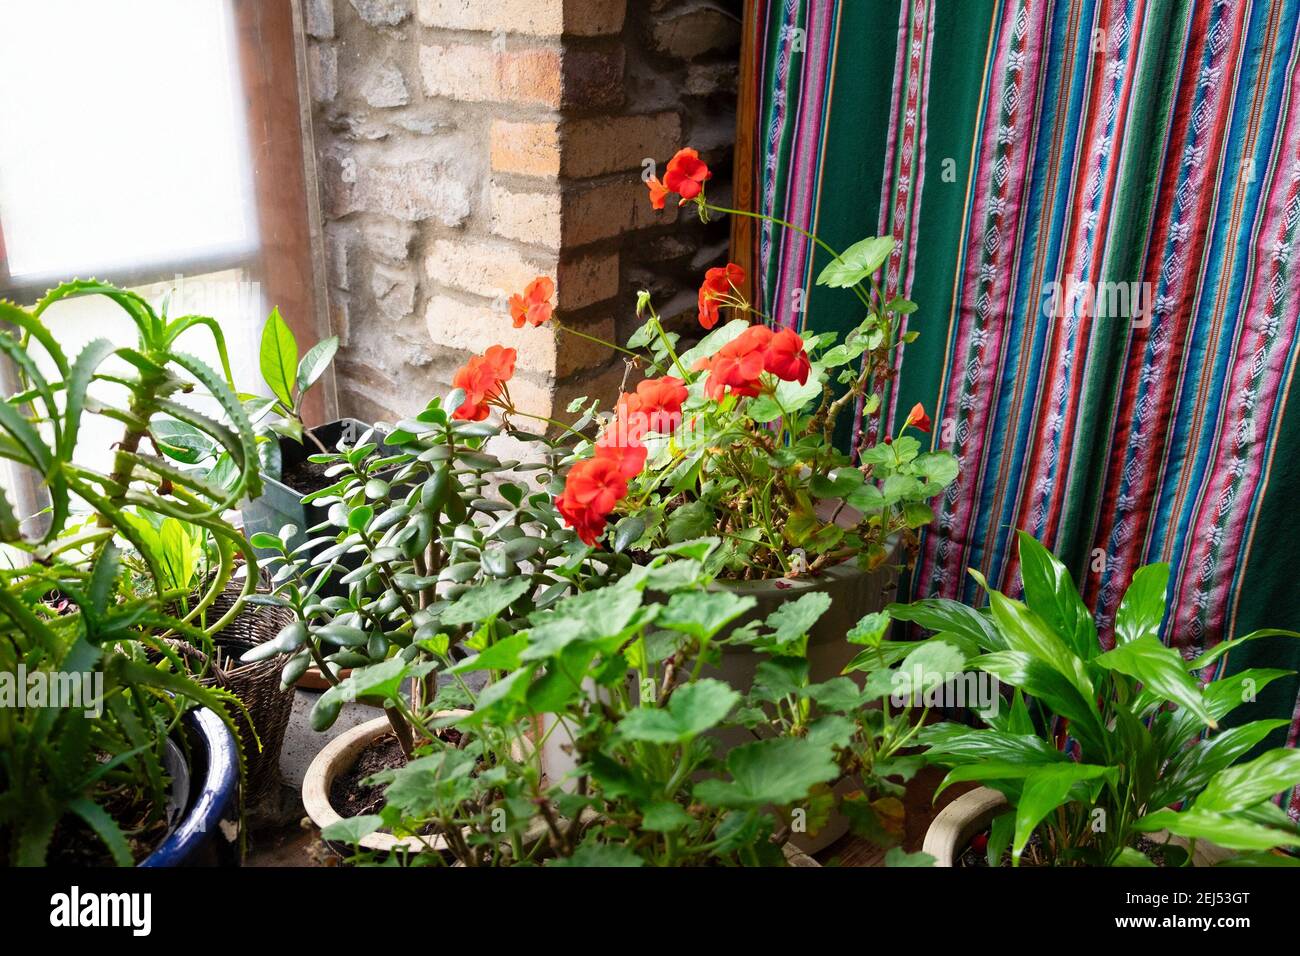 Group of houseplants plants in pots inside house home interior, red geranium in bloom in February winter, fabric textile Wales UK Britain KATHY DEWITT Stock Photo